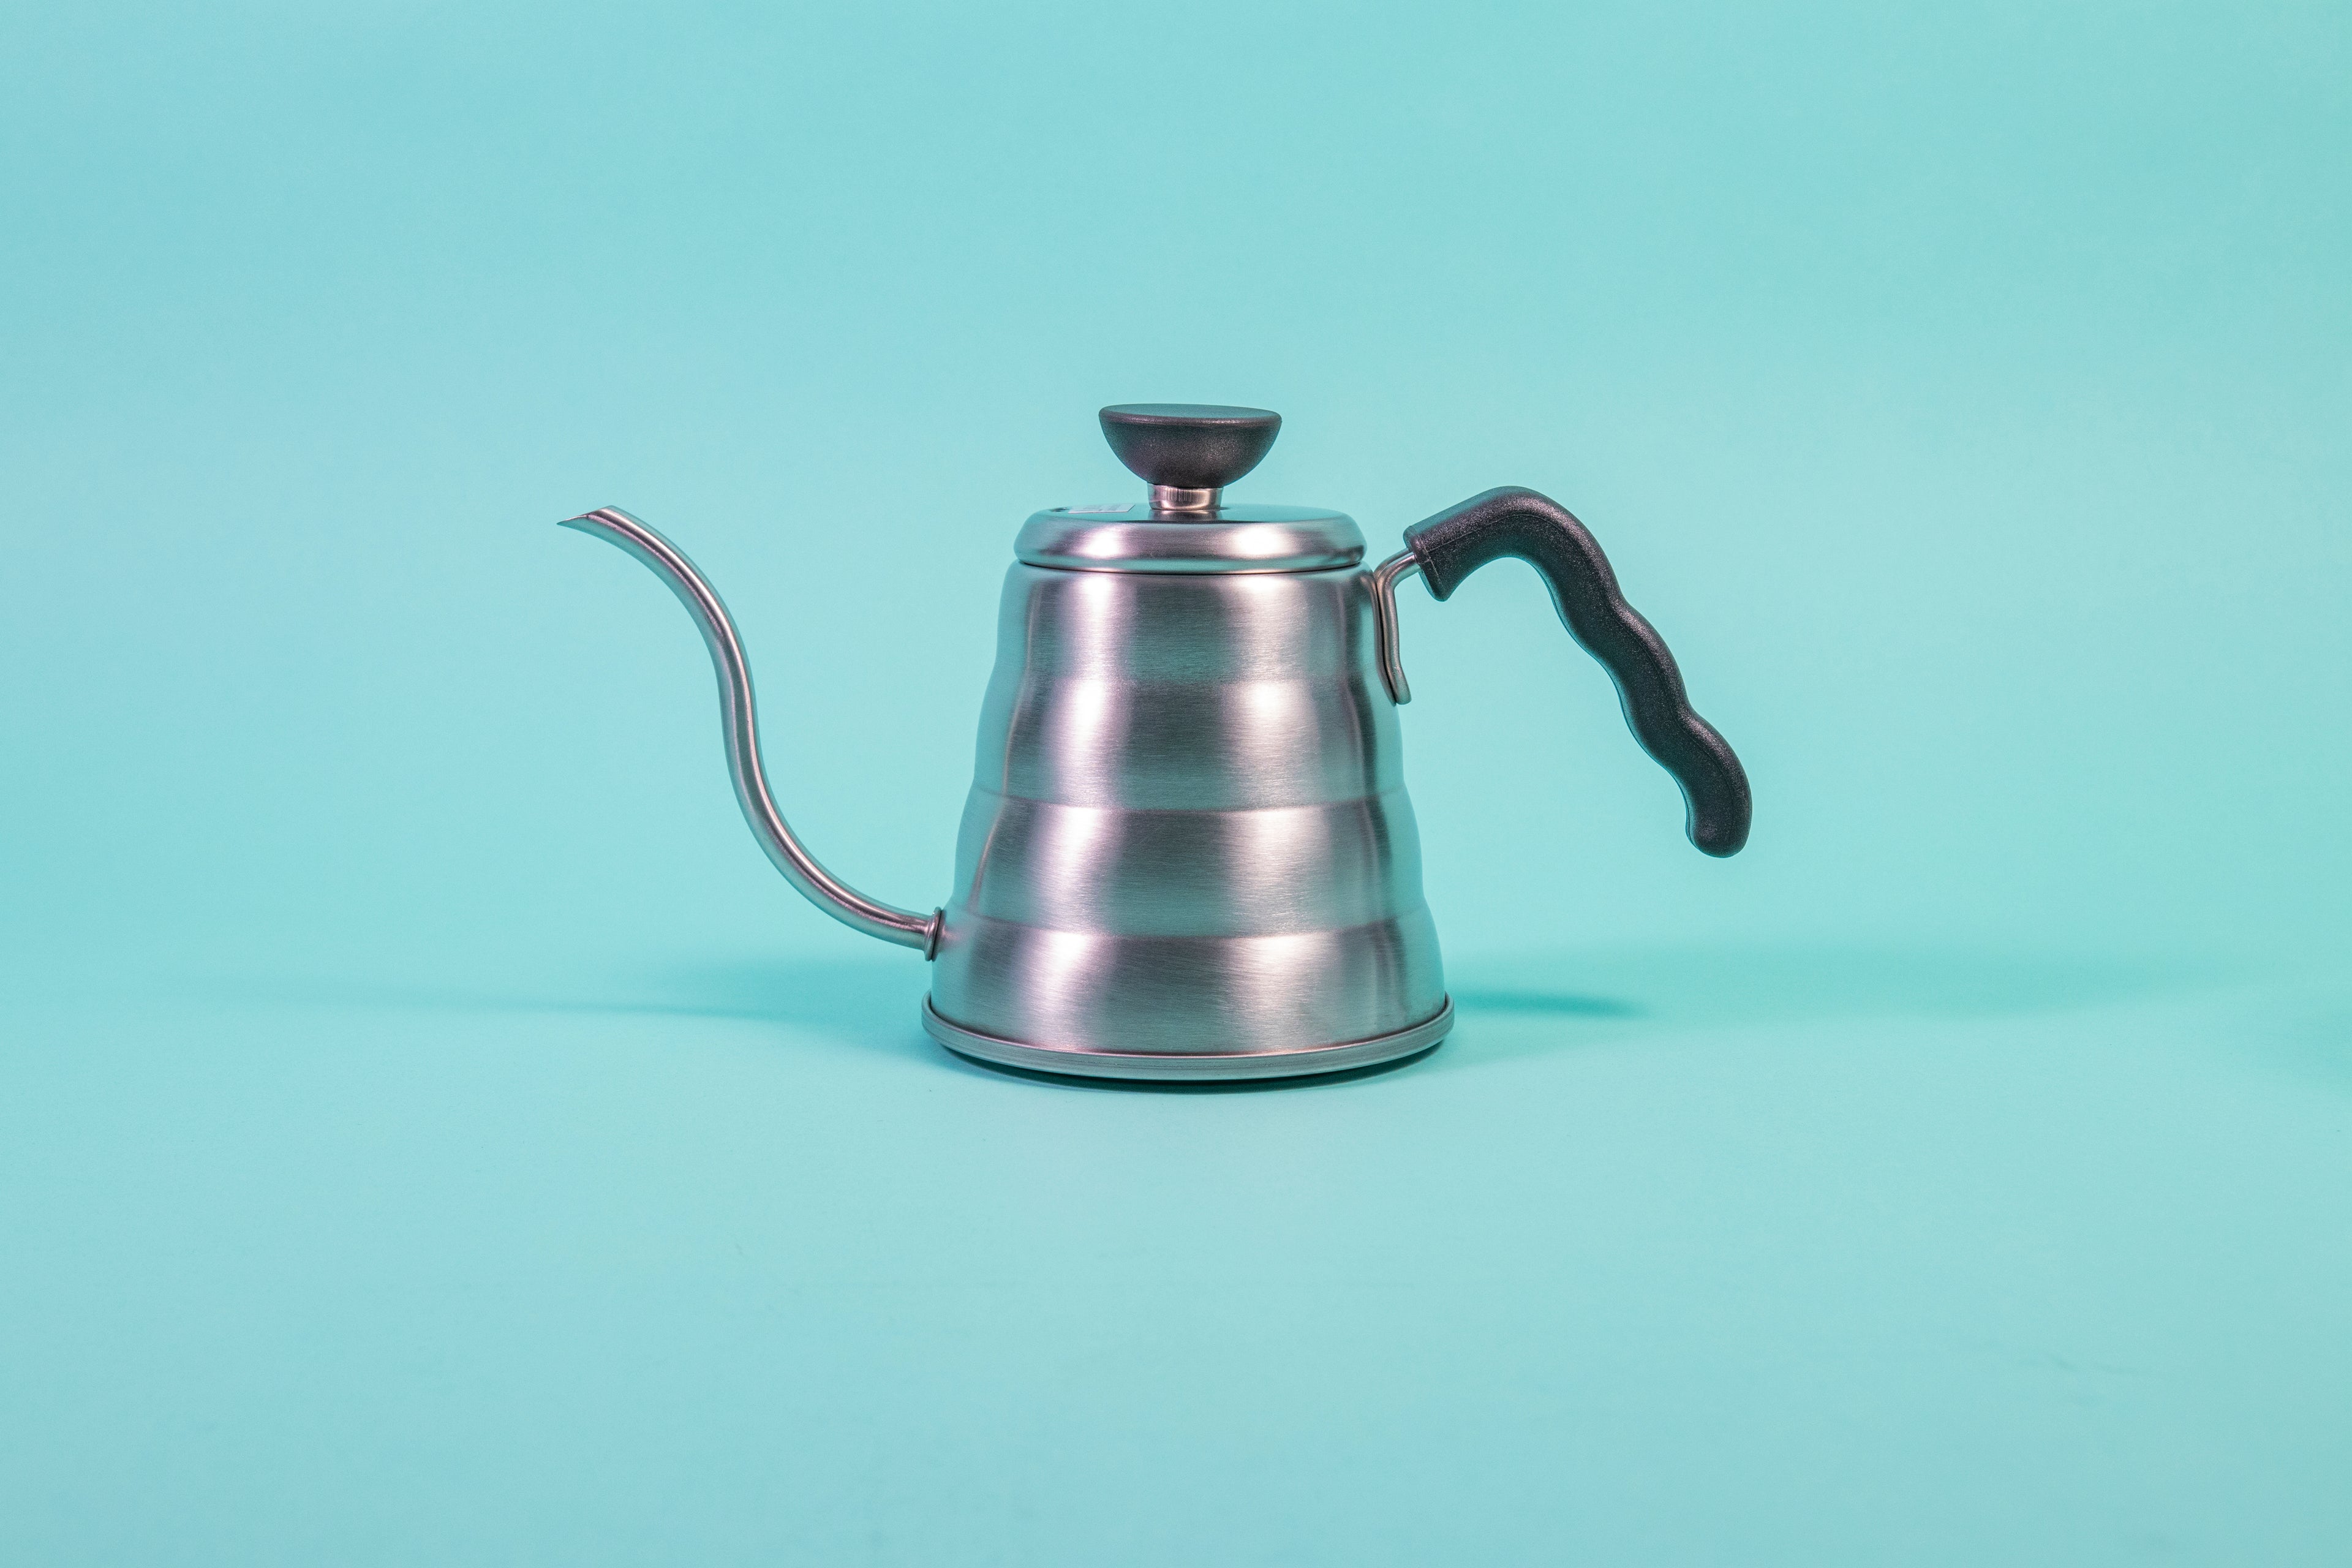 Silver beehive-shaped stainless steel kettle with wave-shaped black plastic handle and round black plastic lid knob with flat top set against a light blue background.